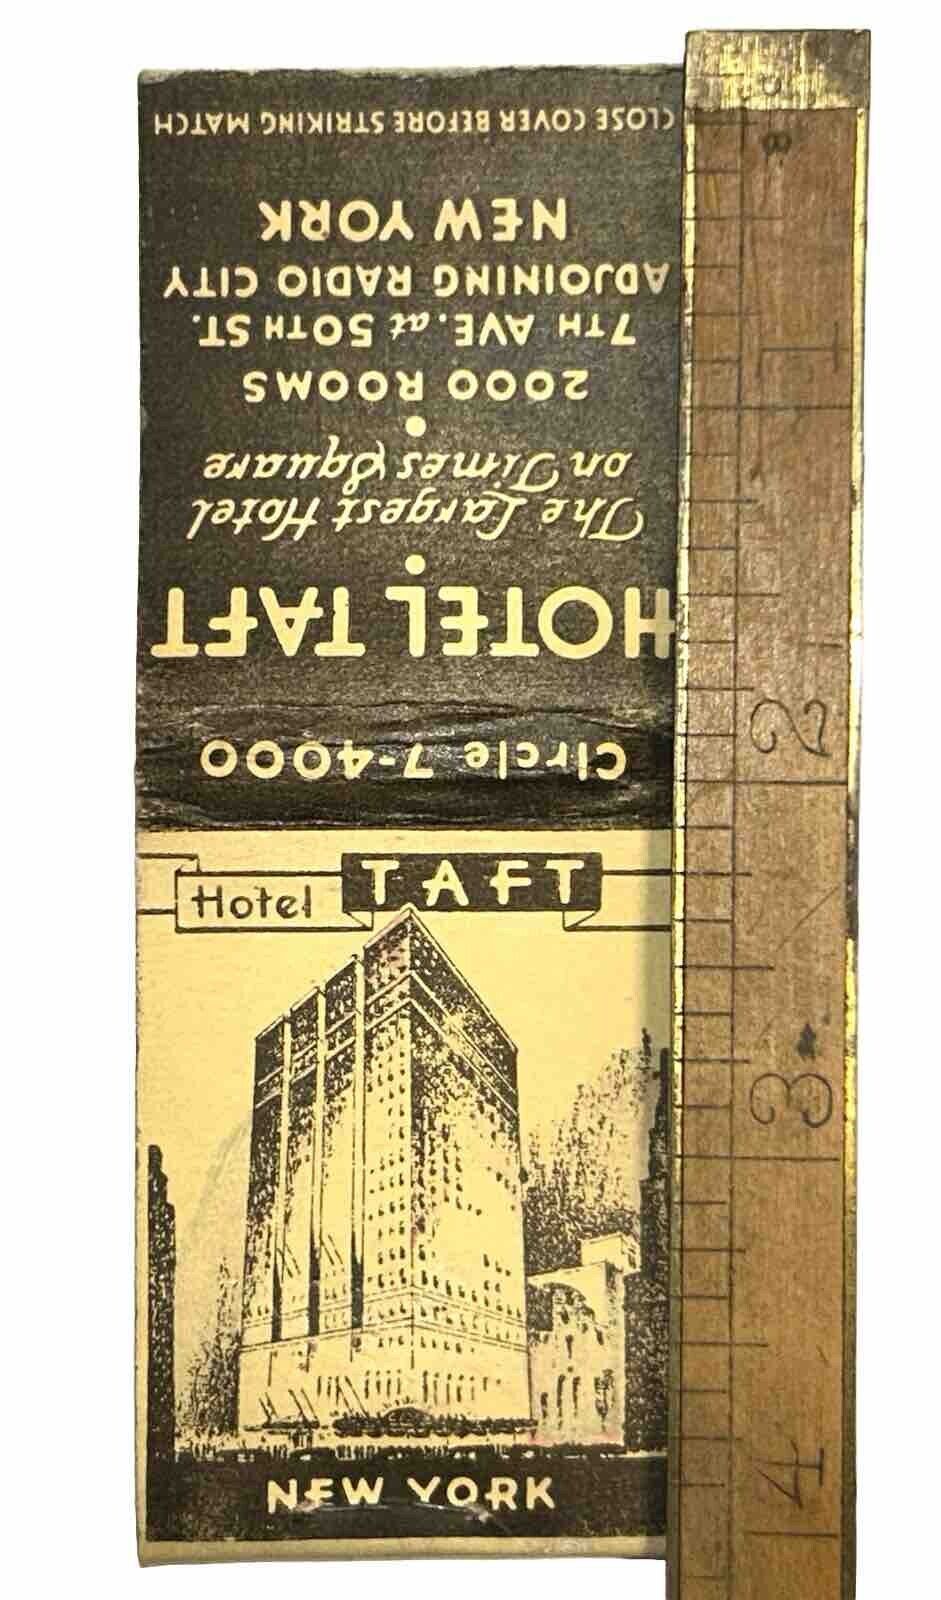 Antique Rare Hotel Taft Times Square Early Advertising Match Book Diamond Co NY 